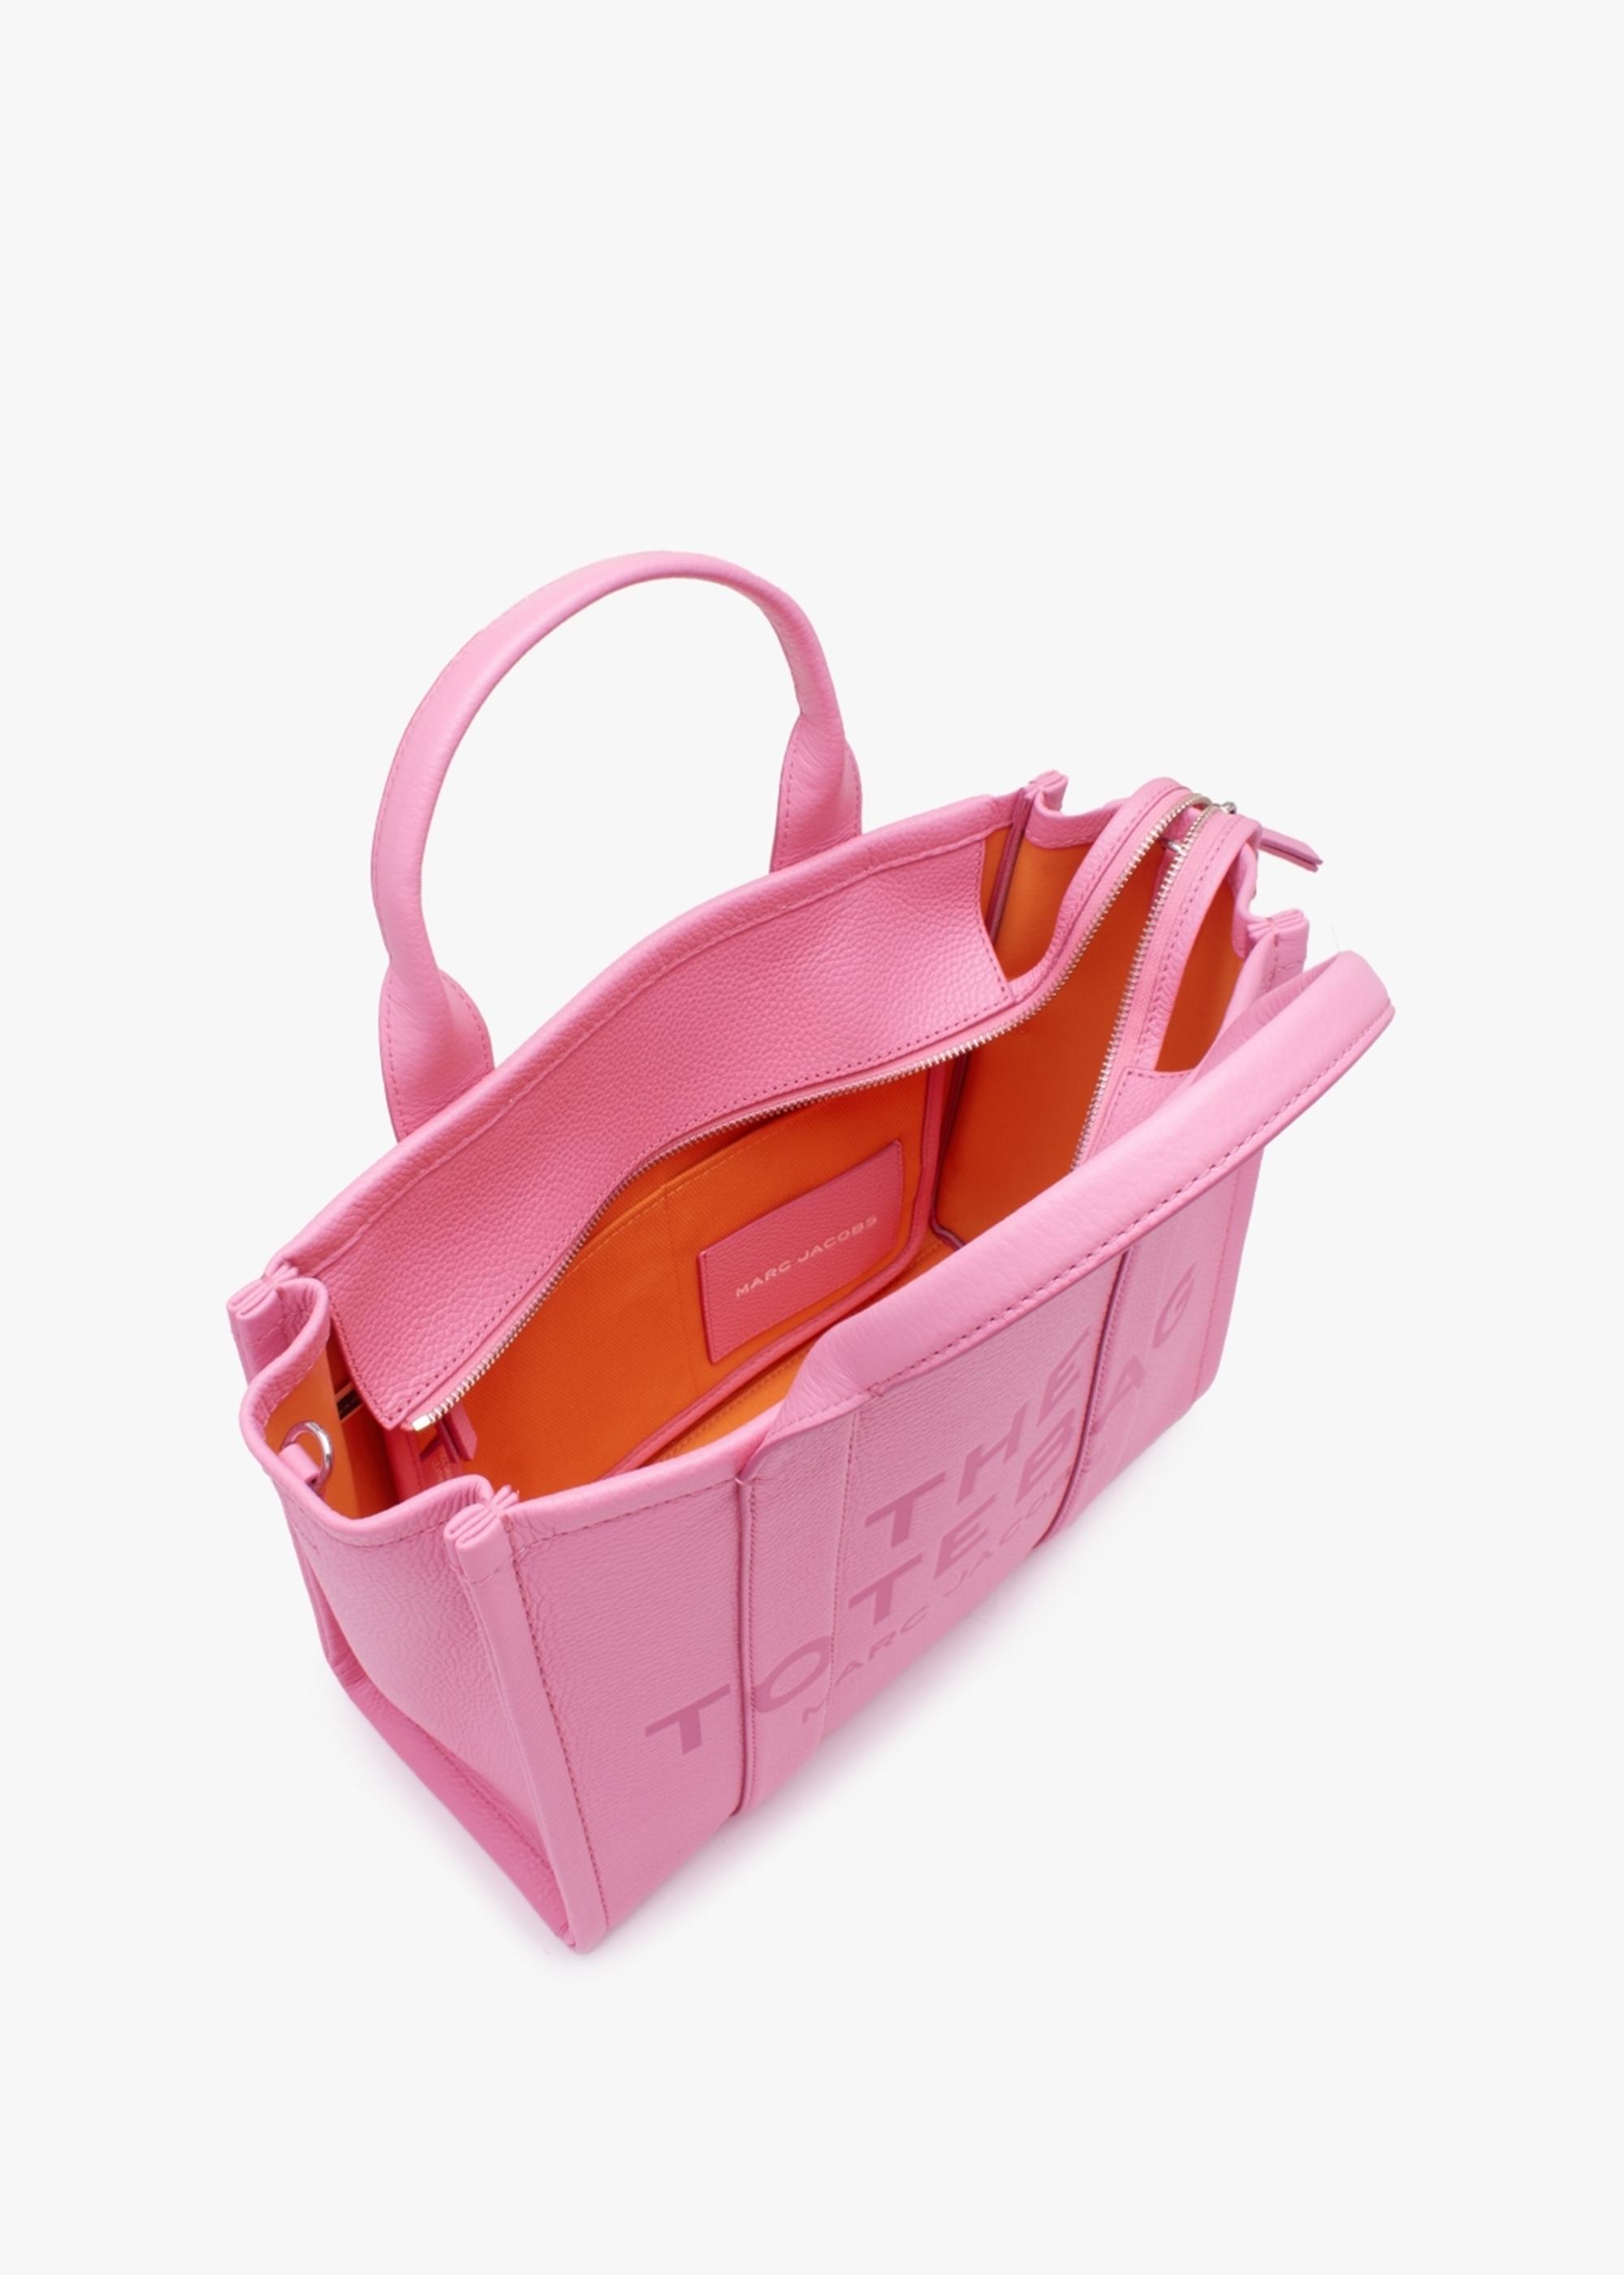 Marc Jacob leather medium tote bag in color candy pink